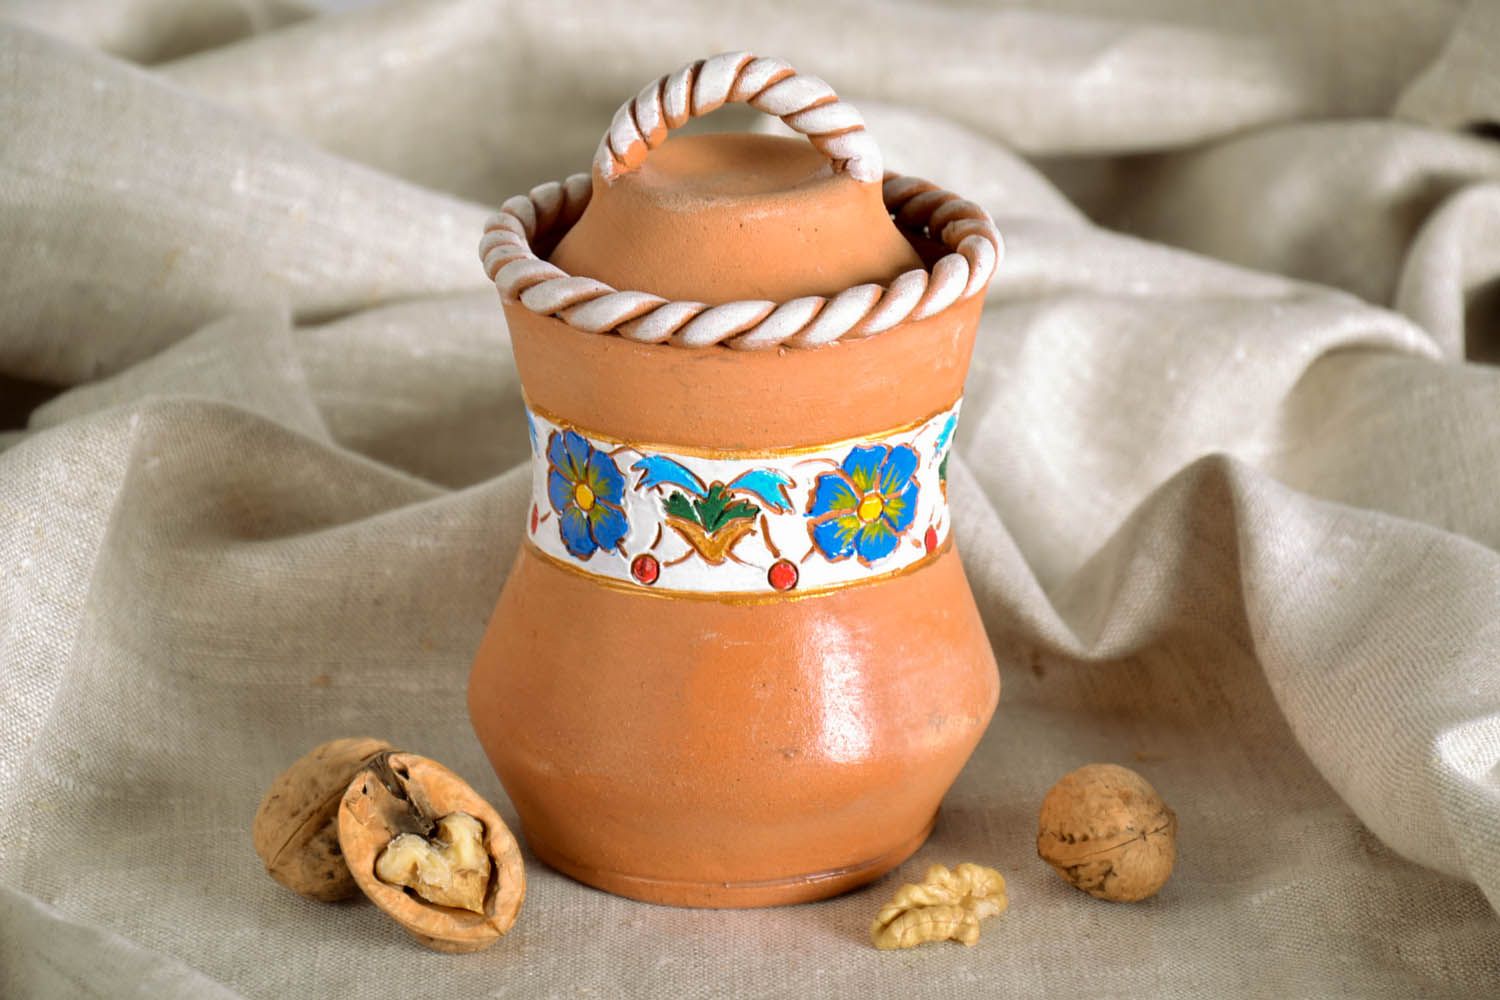 12 oz clay glazed jar with molded pattern and floral design in terracotta color 0,9 lb photo 1